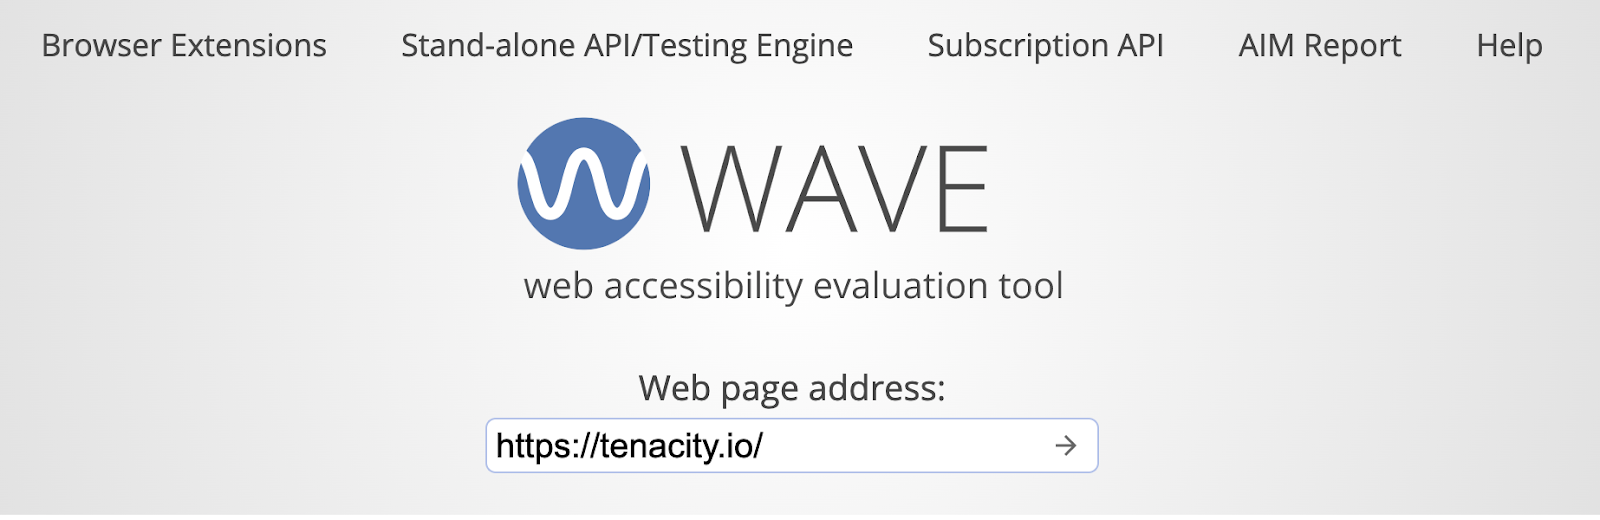 A screen capture of the WAVE (web accessibility evaluation tool) website accessibility tool search bar.